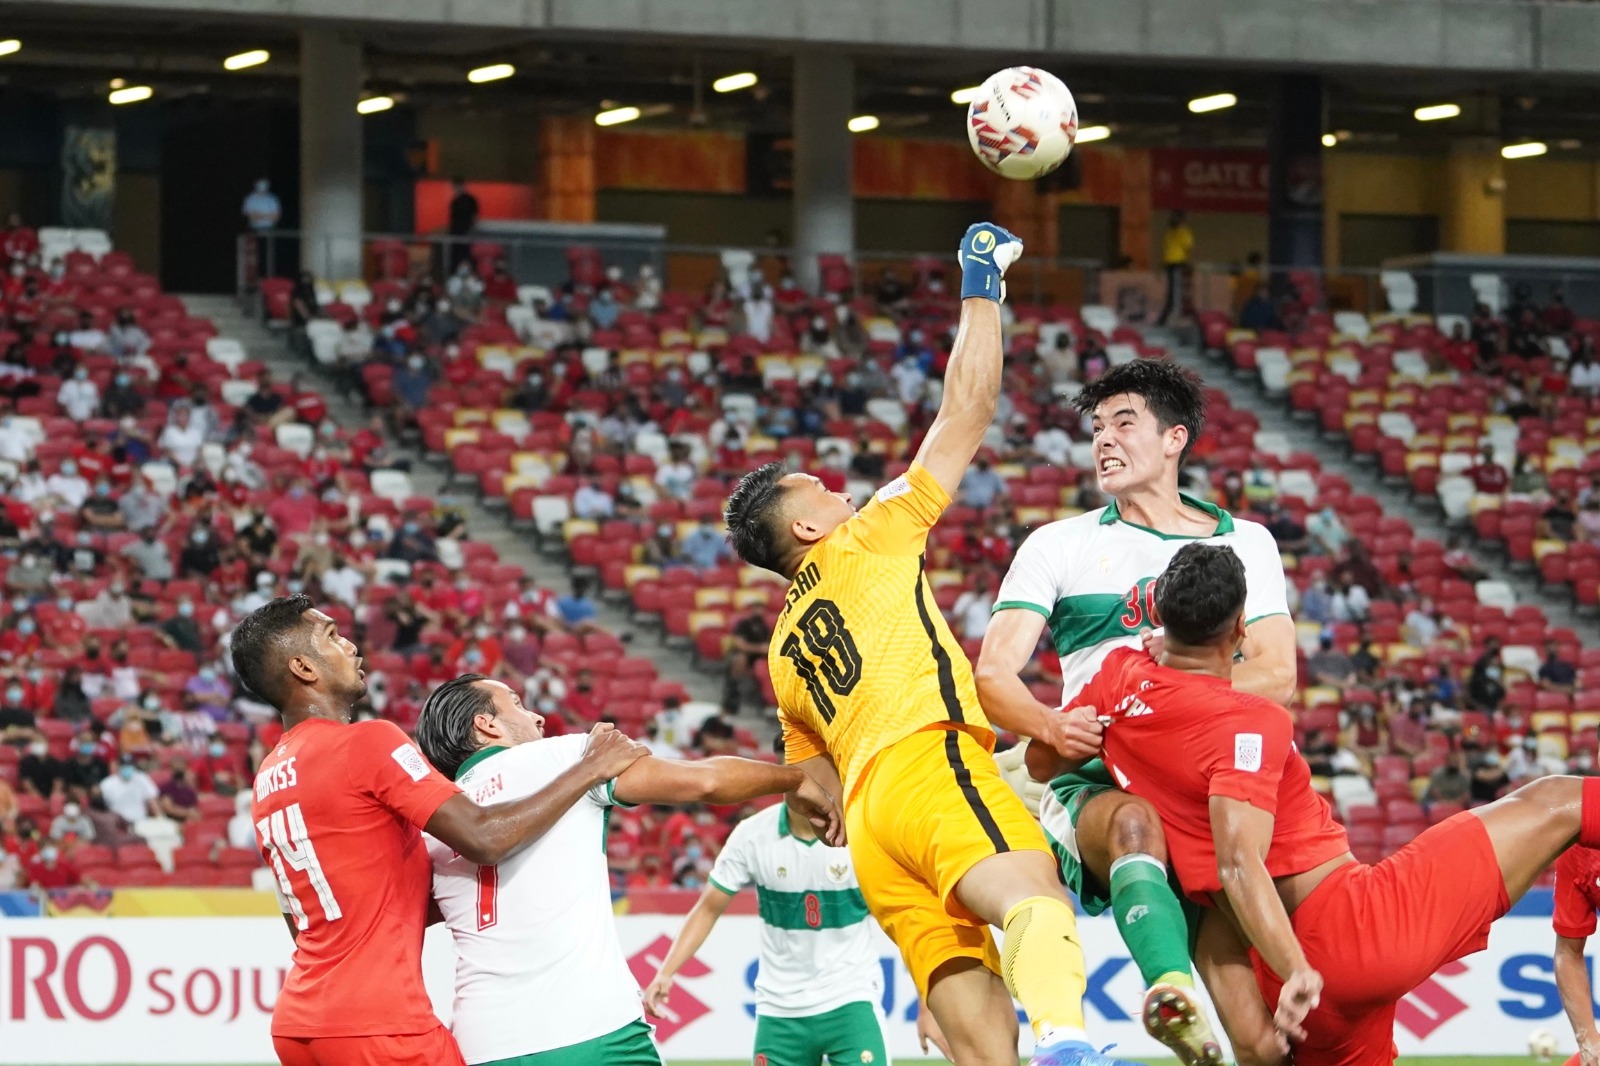 Singapore and Indonesia locked in 1-1 draw, at the end of 1st leg Semis clash in AFF Suzuki Cup 2020!